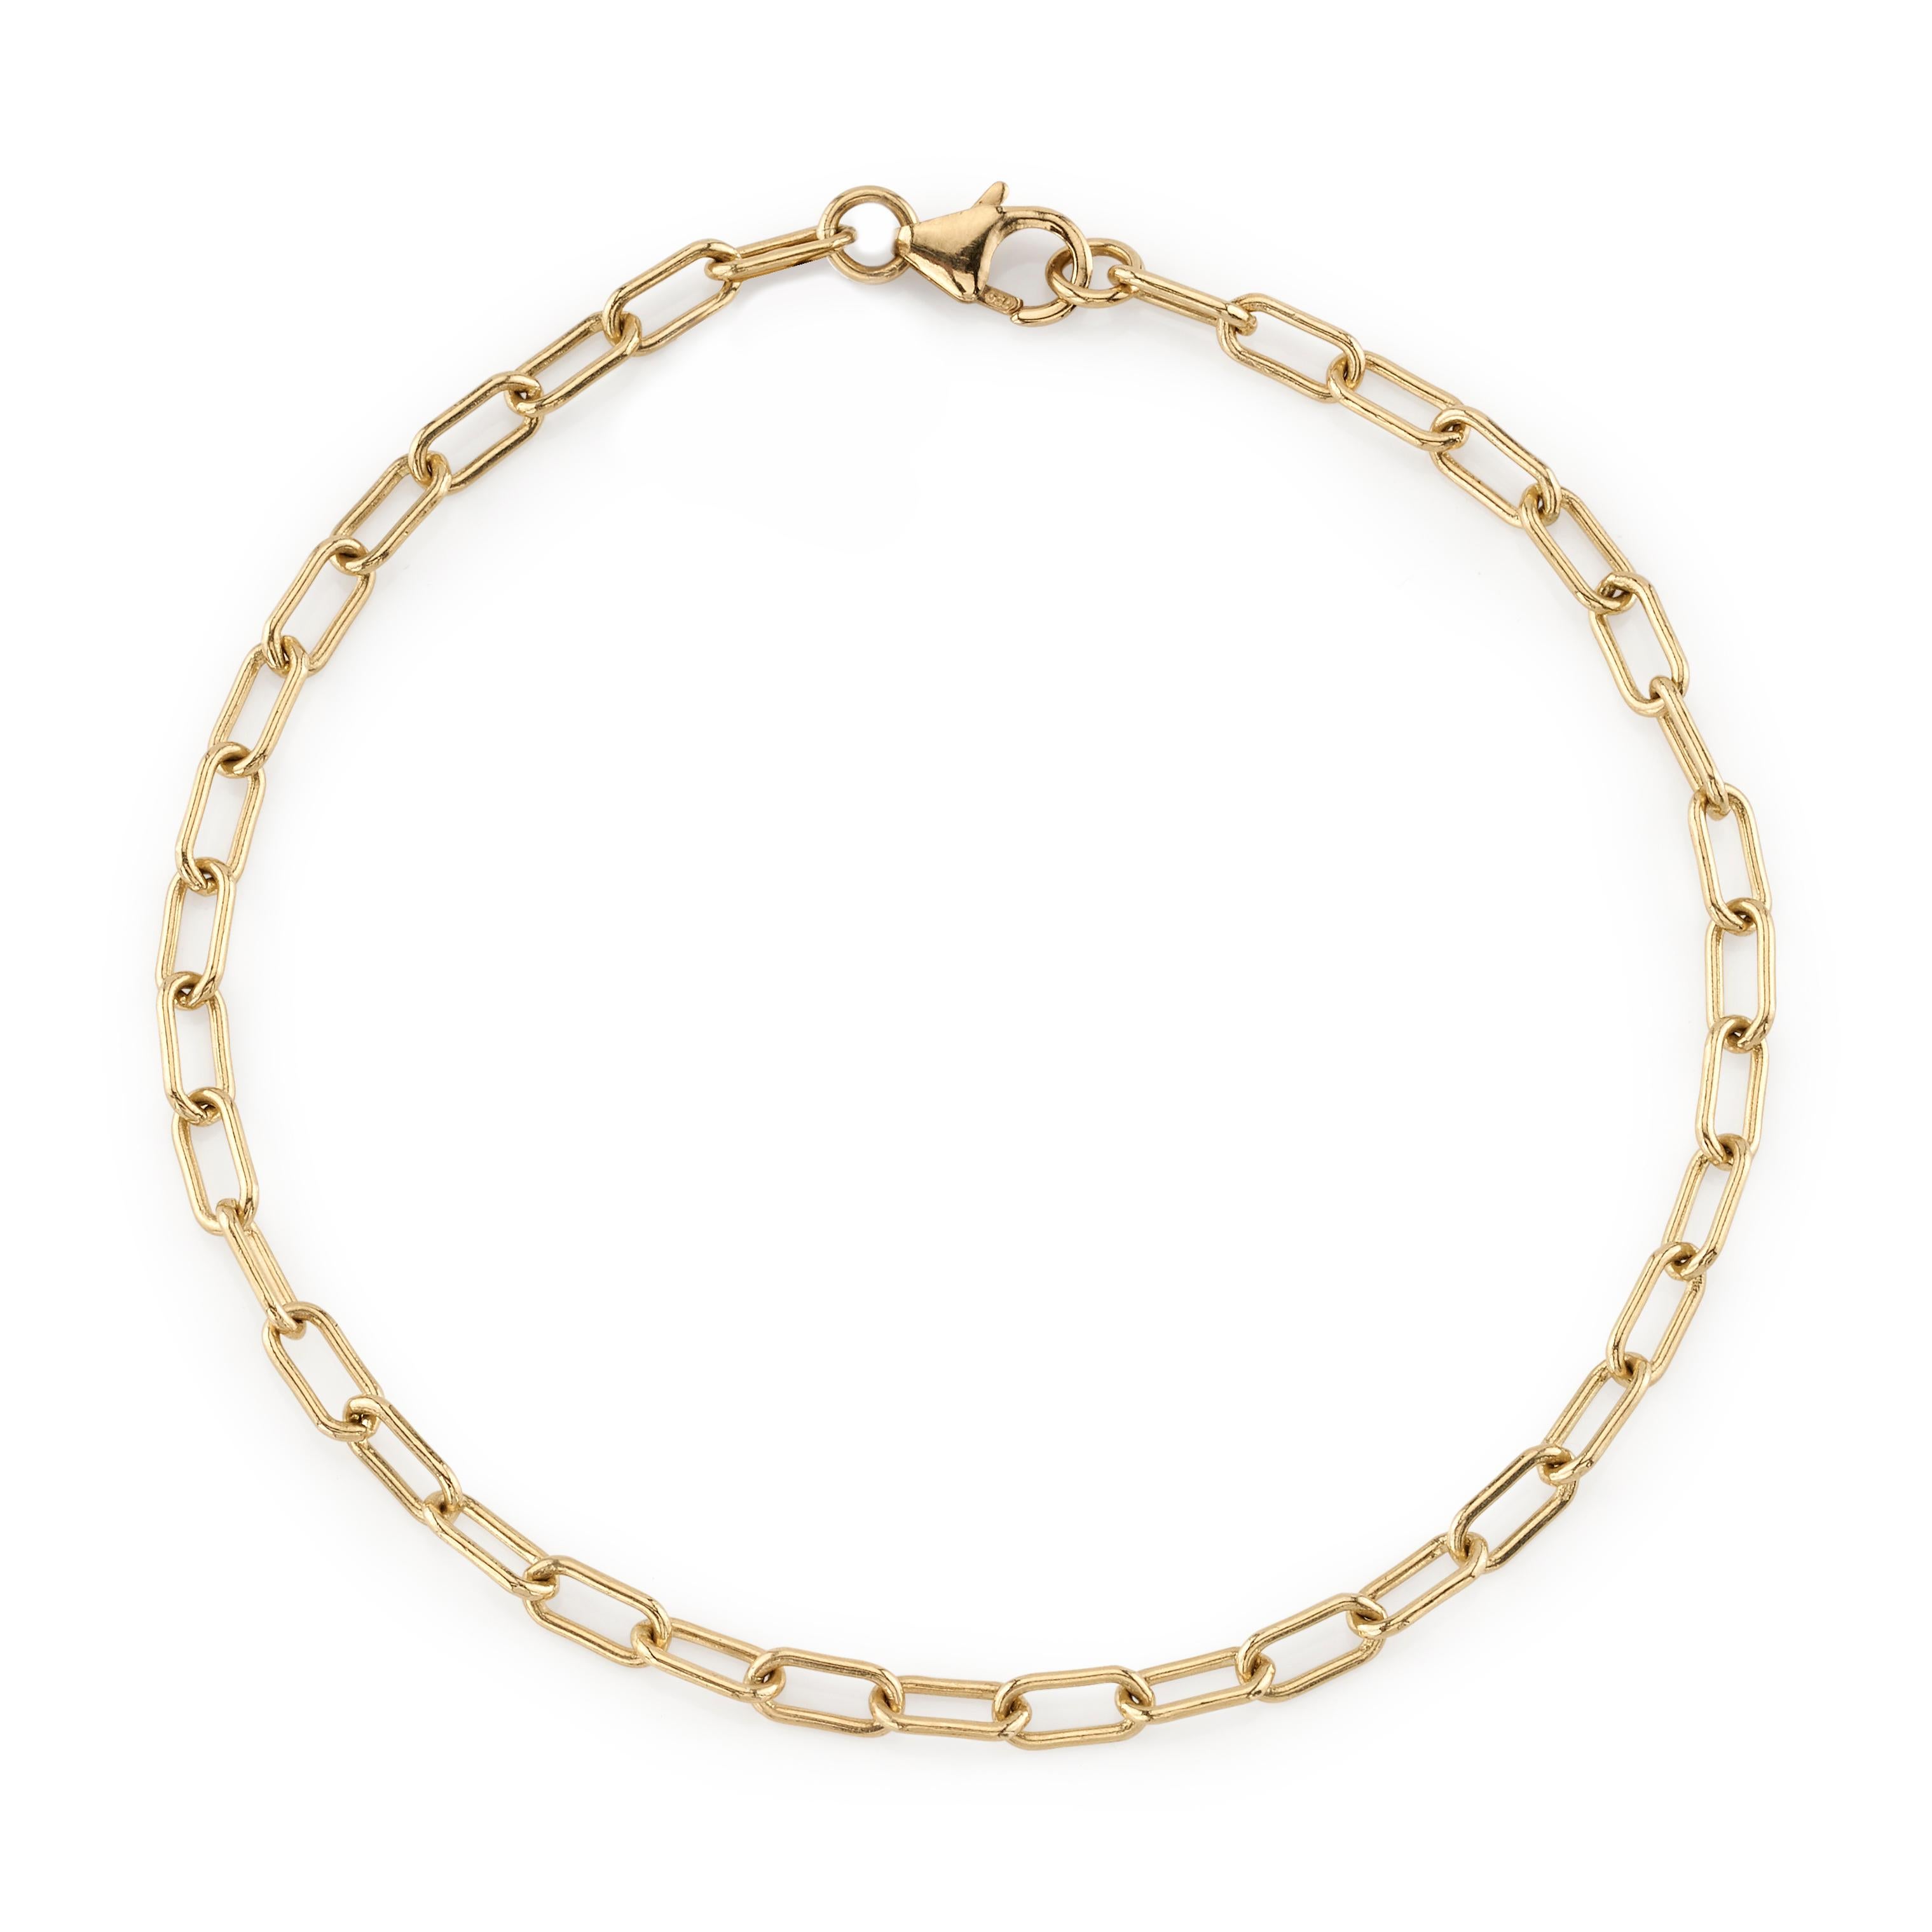 Handcrafted Bond Bracelet in 18K Yellow Gold by Single Stone For Sale